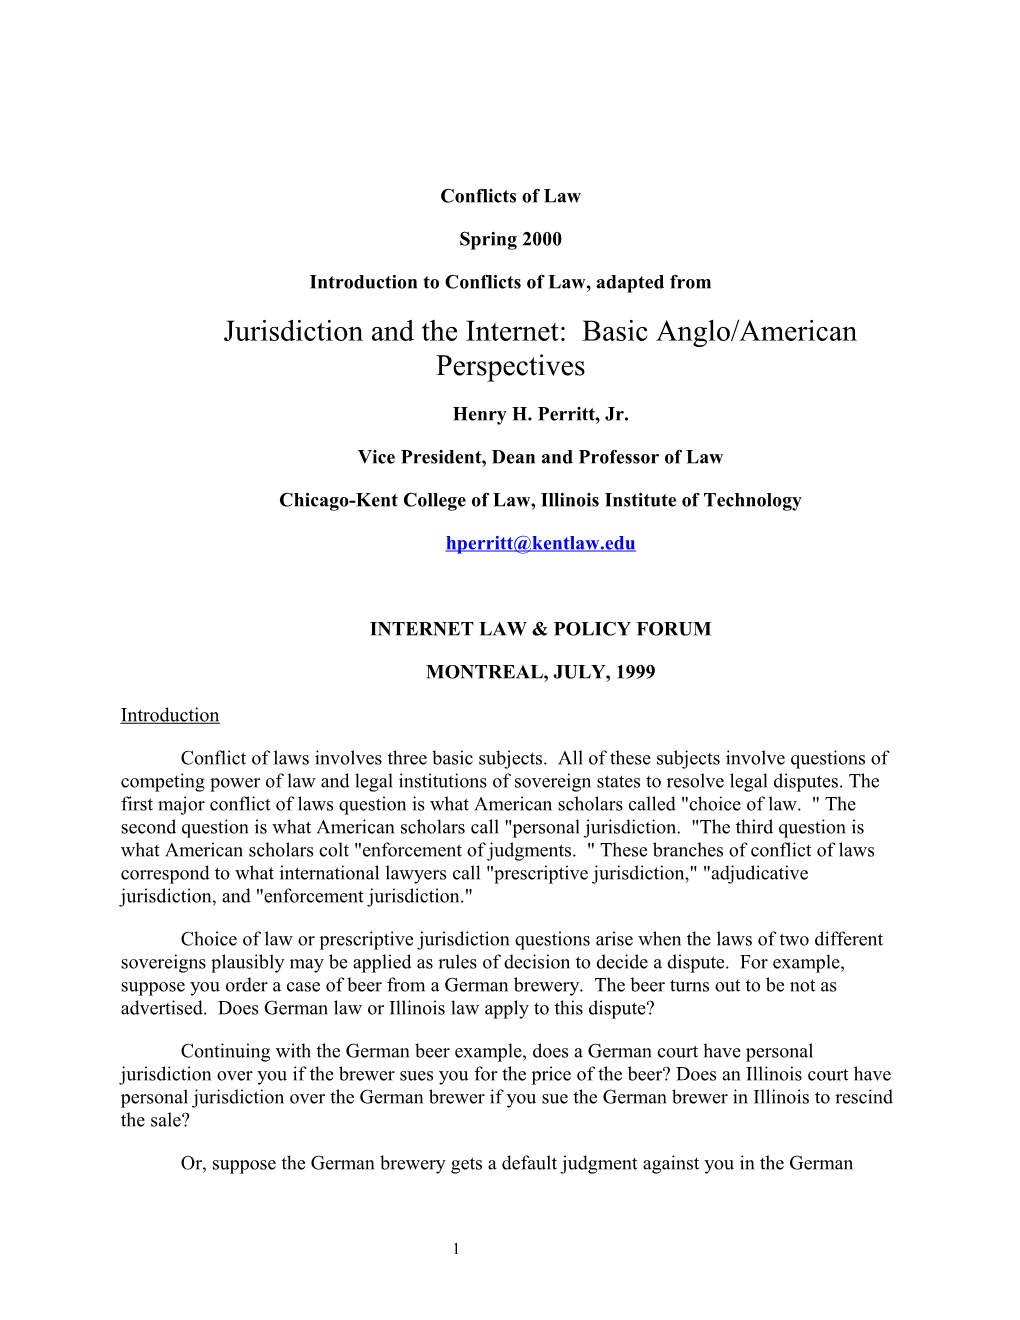 Jurisdiction and the Internet: Basic Anglo/American Perspectives